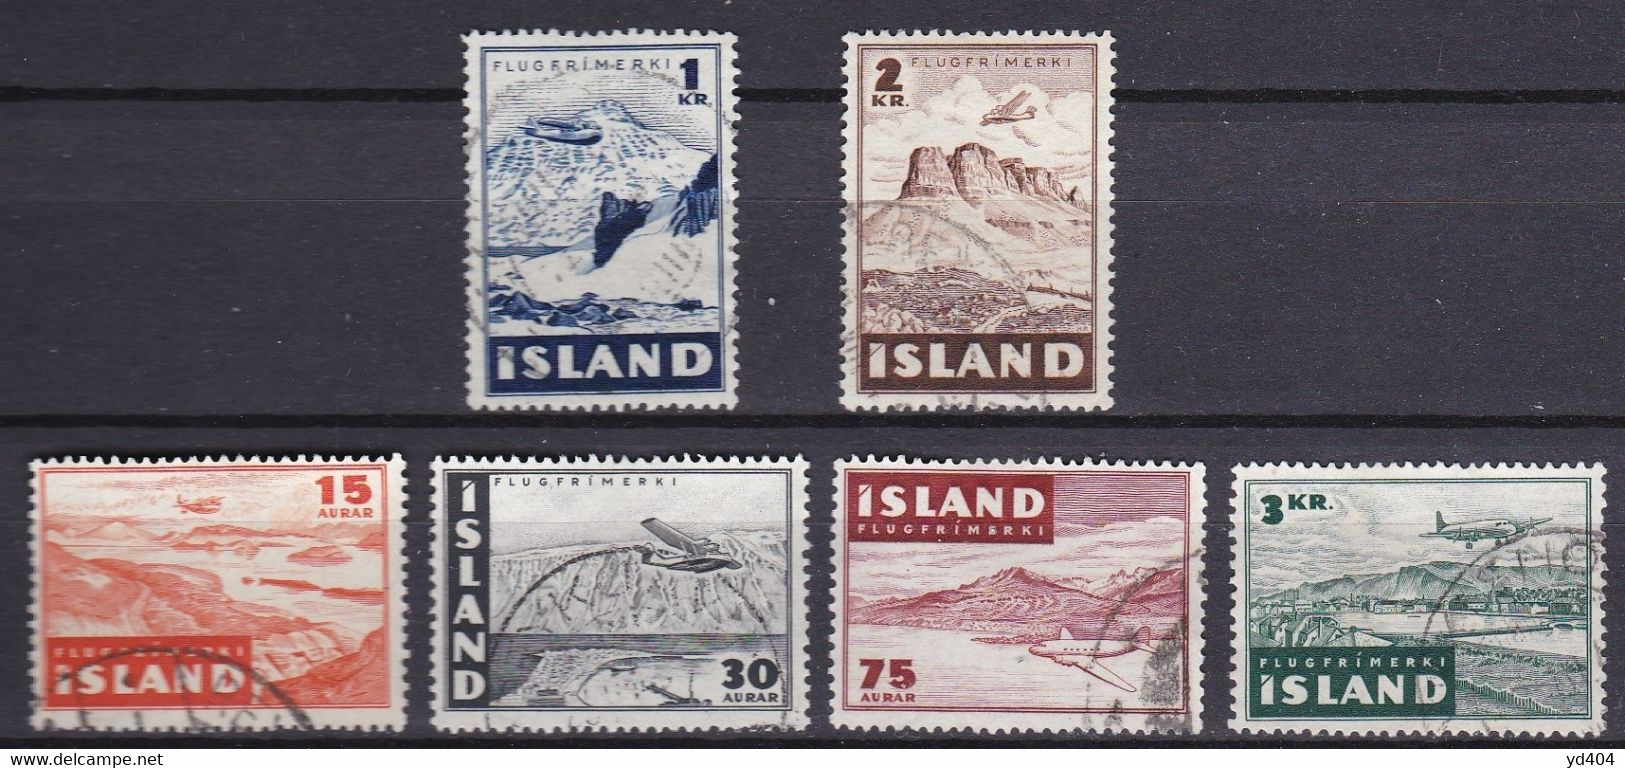 IS330 – ISLANDE – ICELAND – 1947 – PLANE OVER GLACIERS – Y&T # 21/6 USED 10 € - Luchtpost